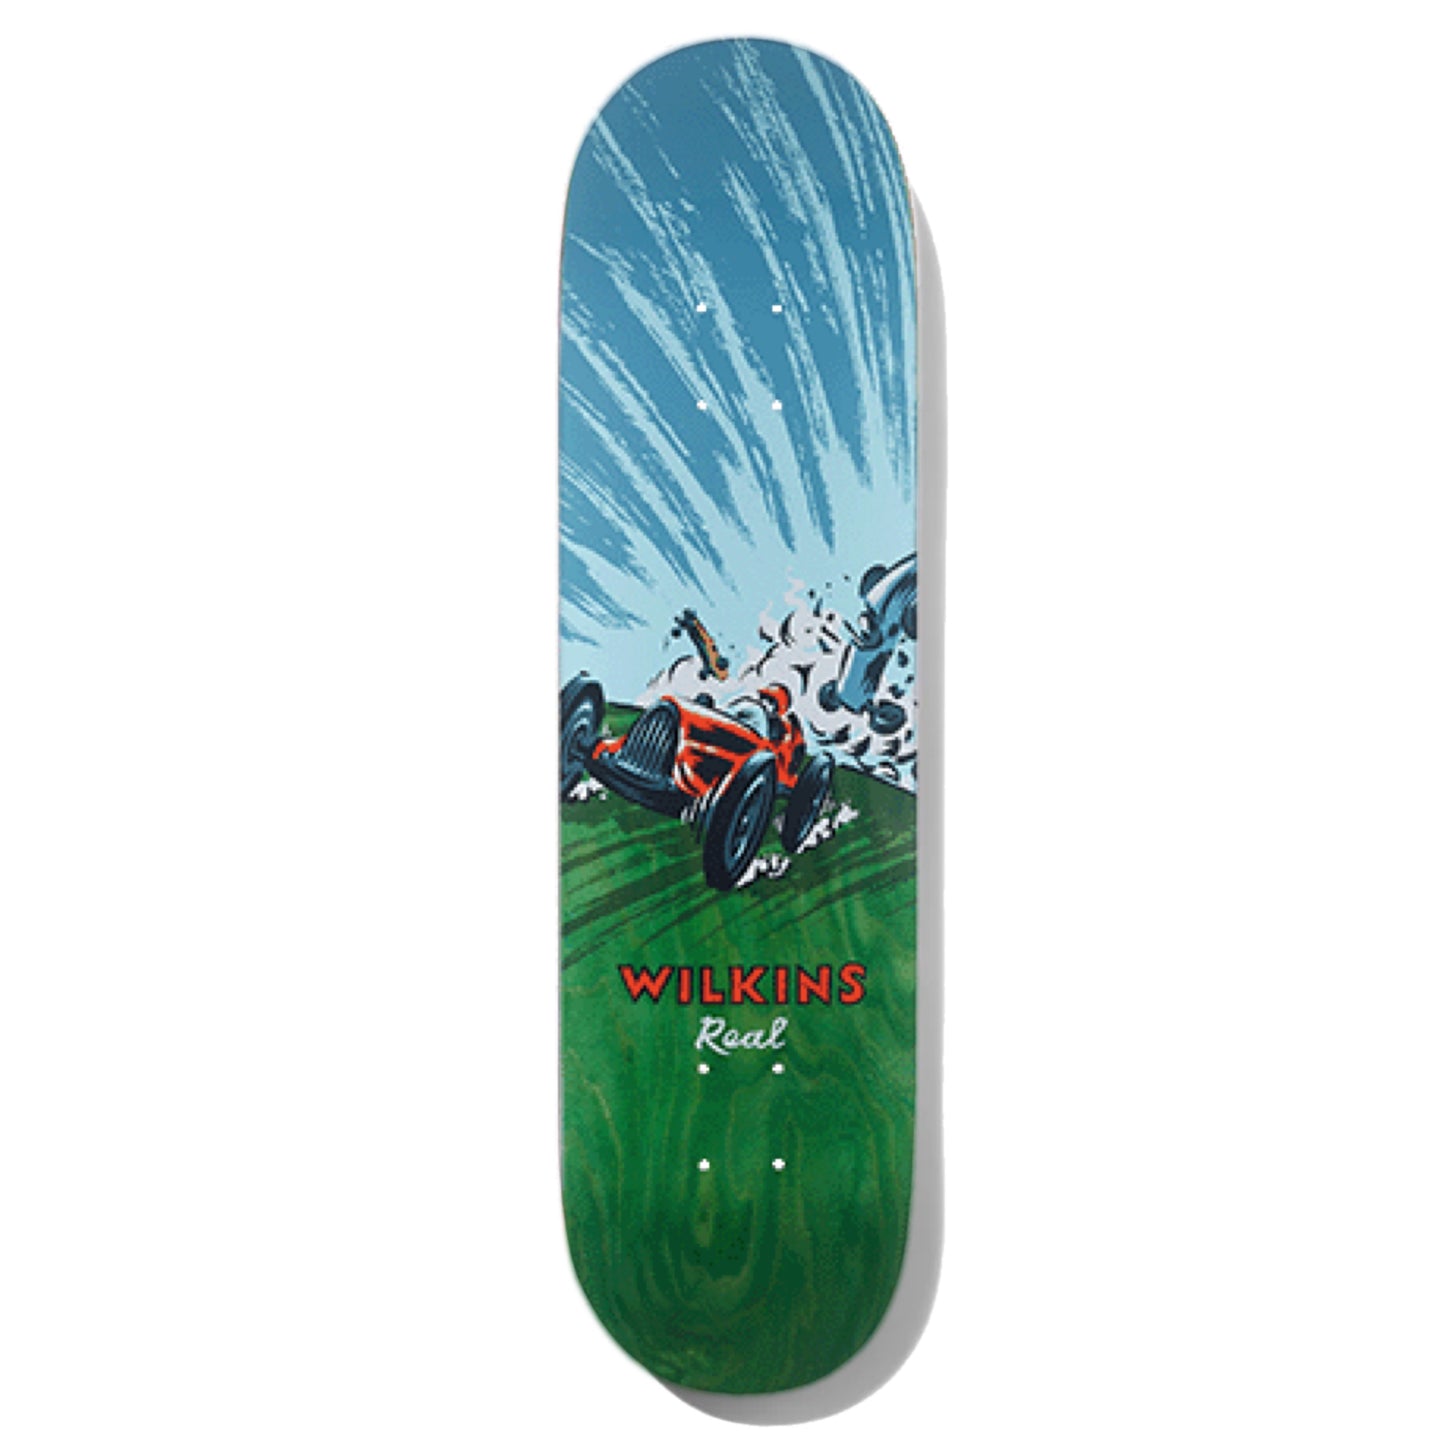 Jimmy Wilkins Pro Model Skateboard Deck; Blue sky; Illustrated old style cars racing; car crashing in background; green grass in bottom half of graphic